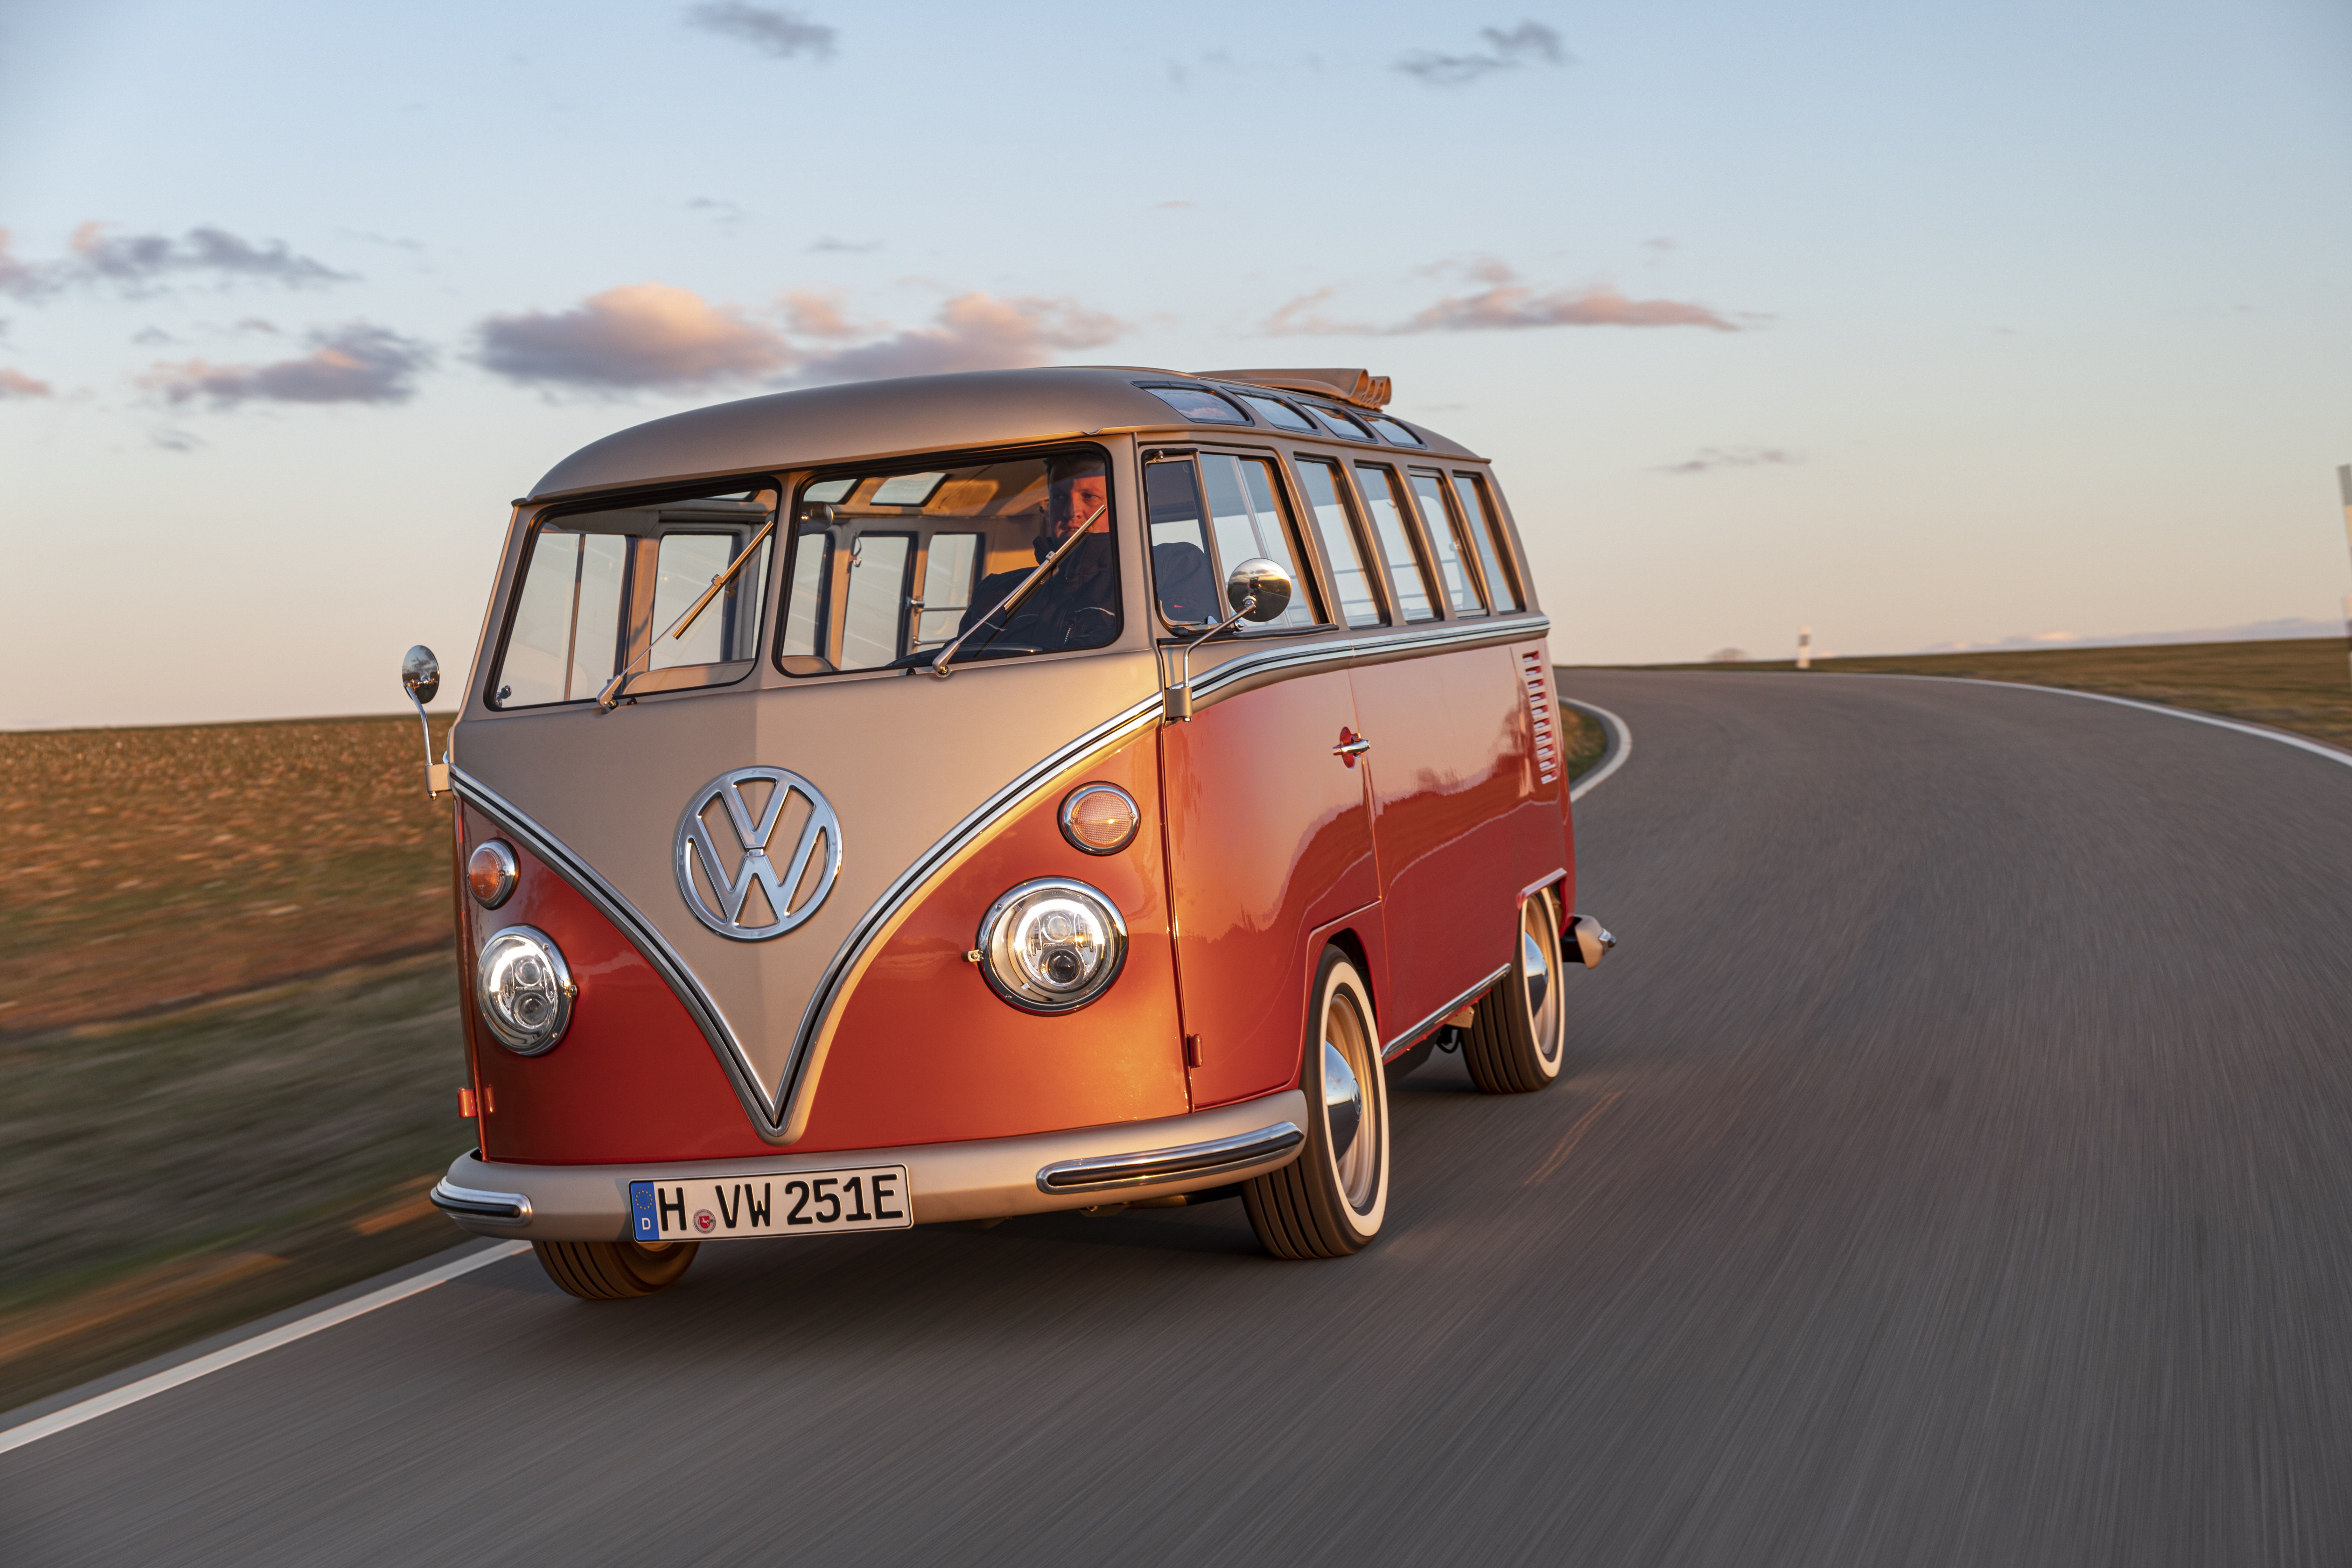 Tested: 1980 Volkswagen Vanagon L Is a Worthy Follow-Up to the Original Bus